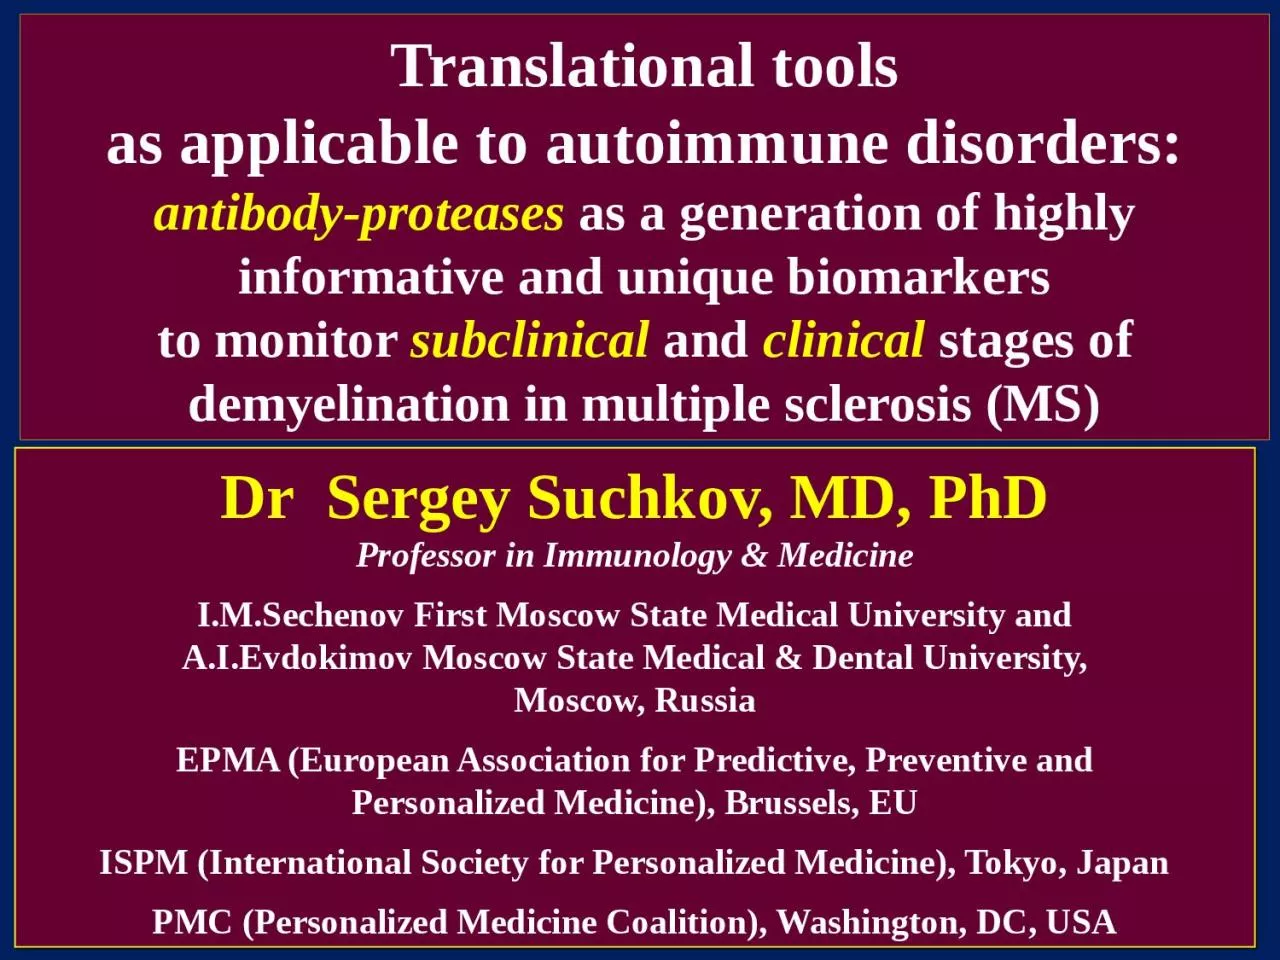 Translational tools as applicable to autoimmune disorders: